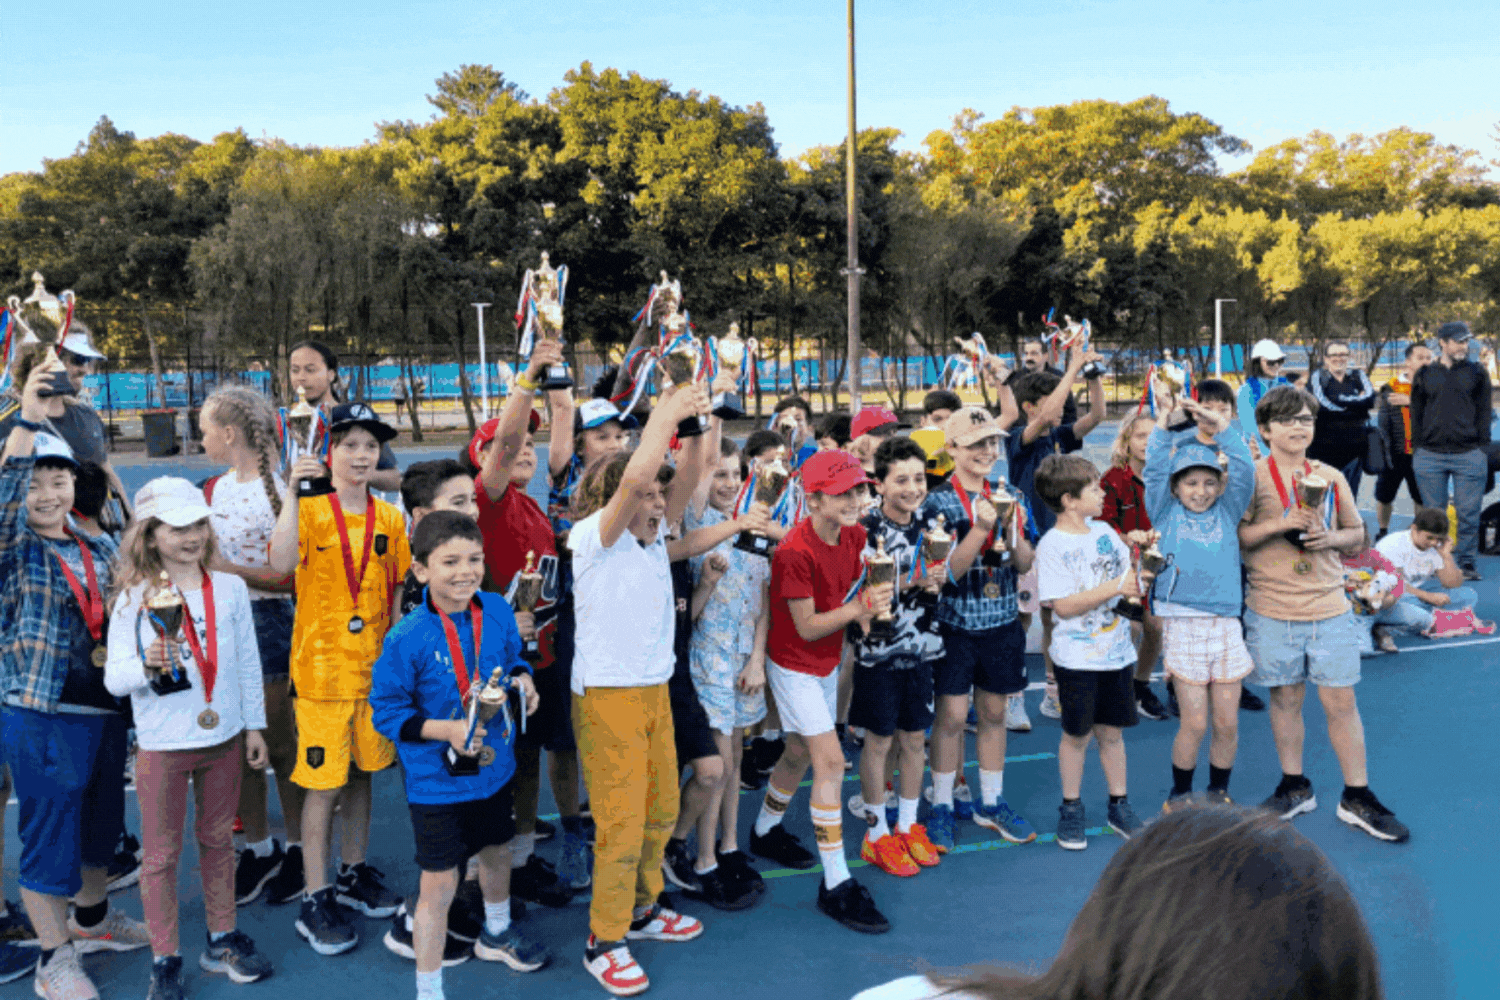 Kids celebrating while holding a trophy